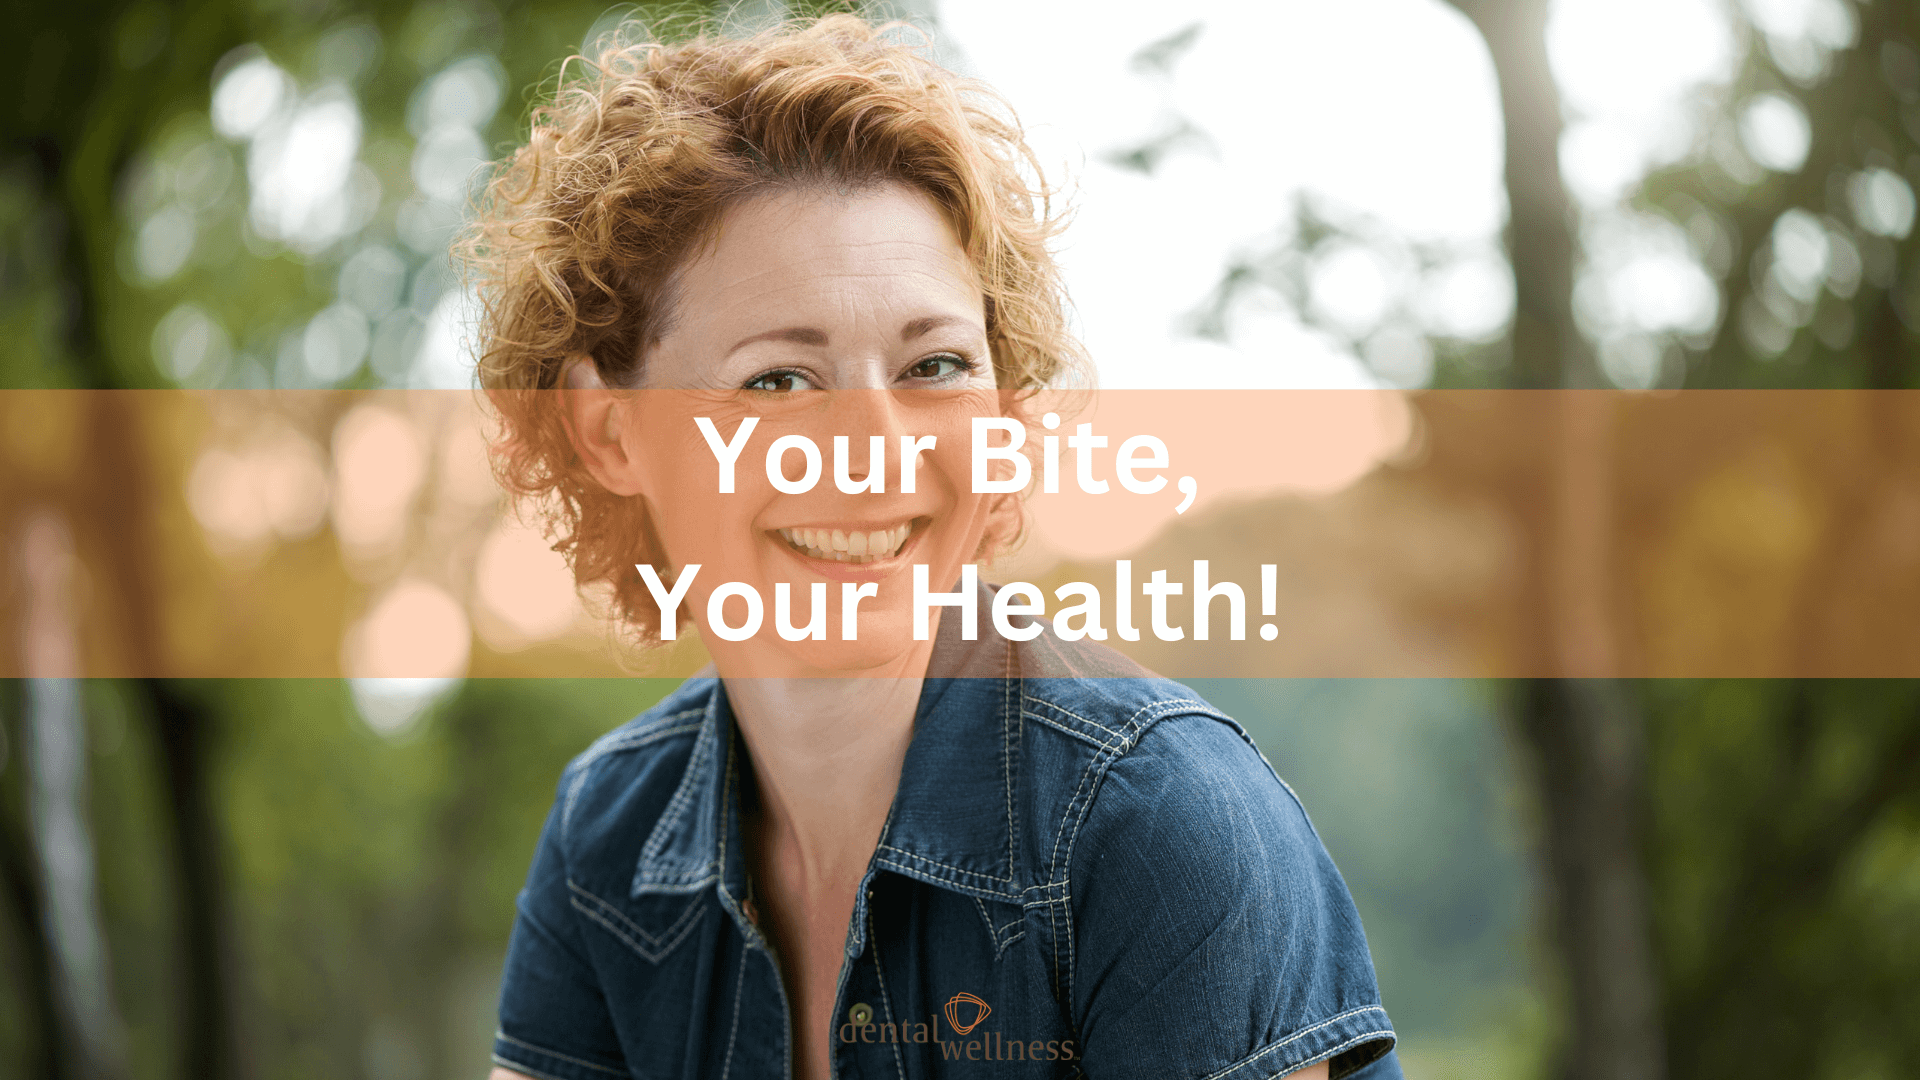 Your bit your health